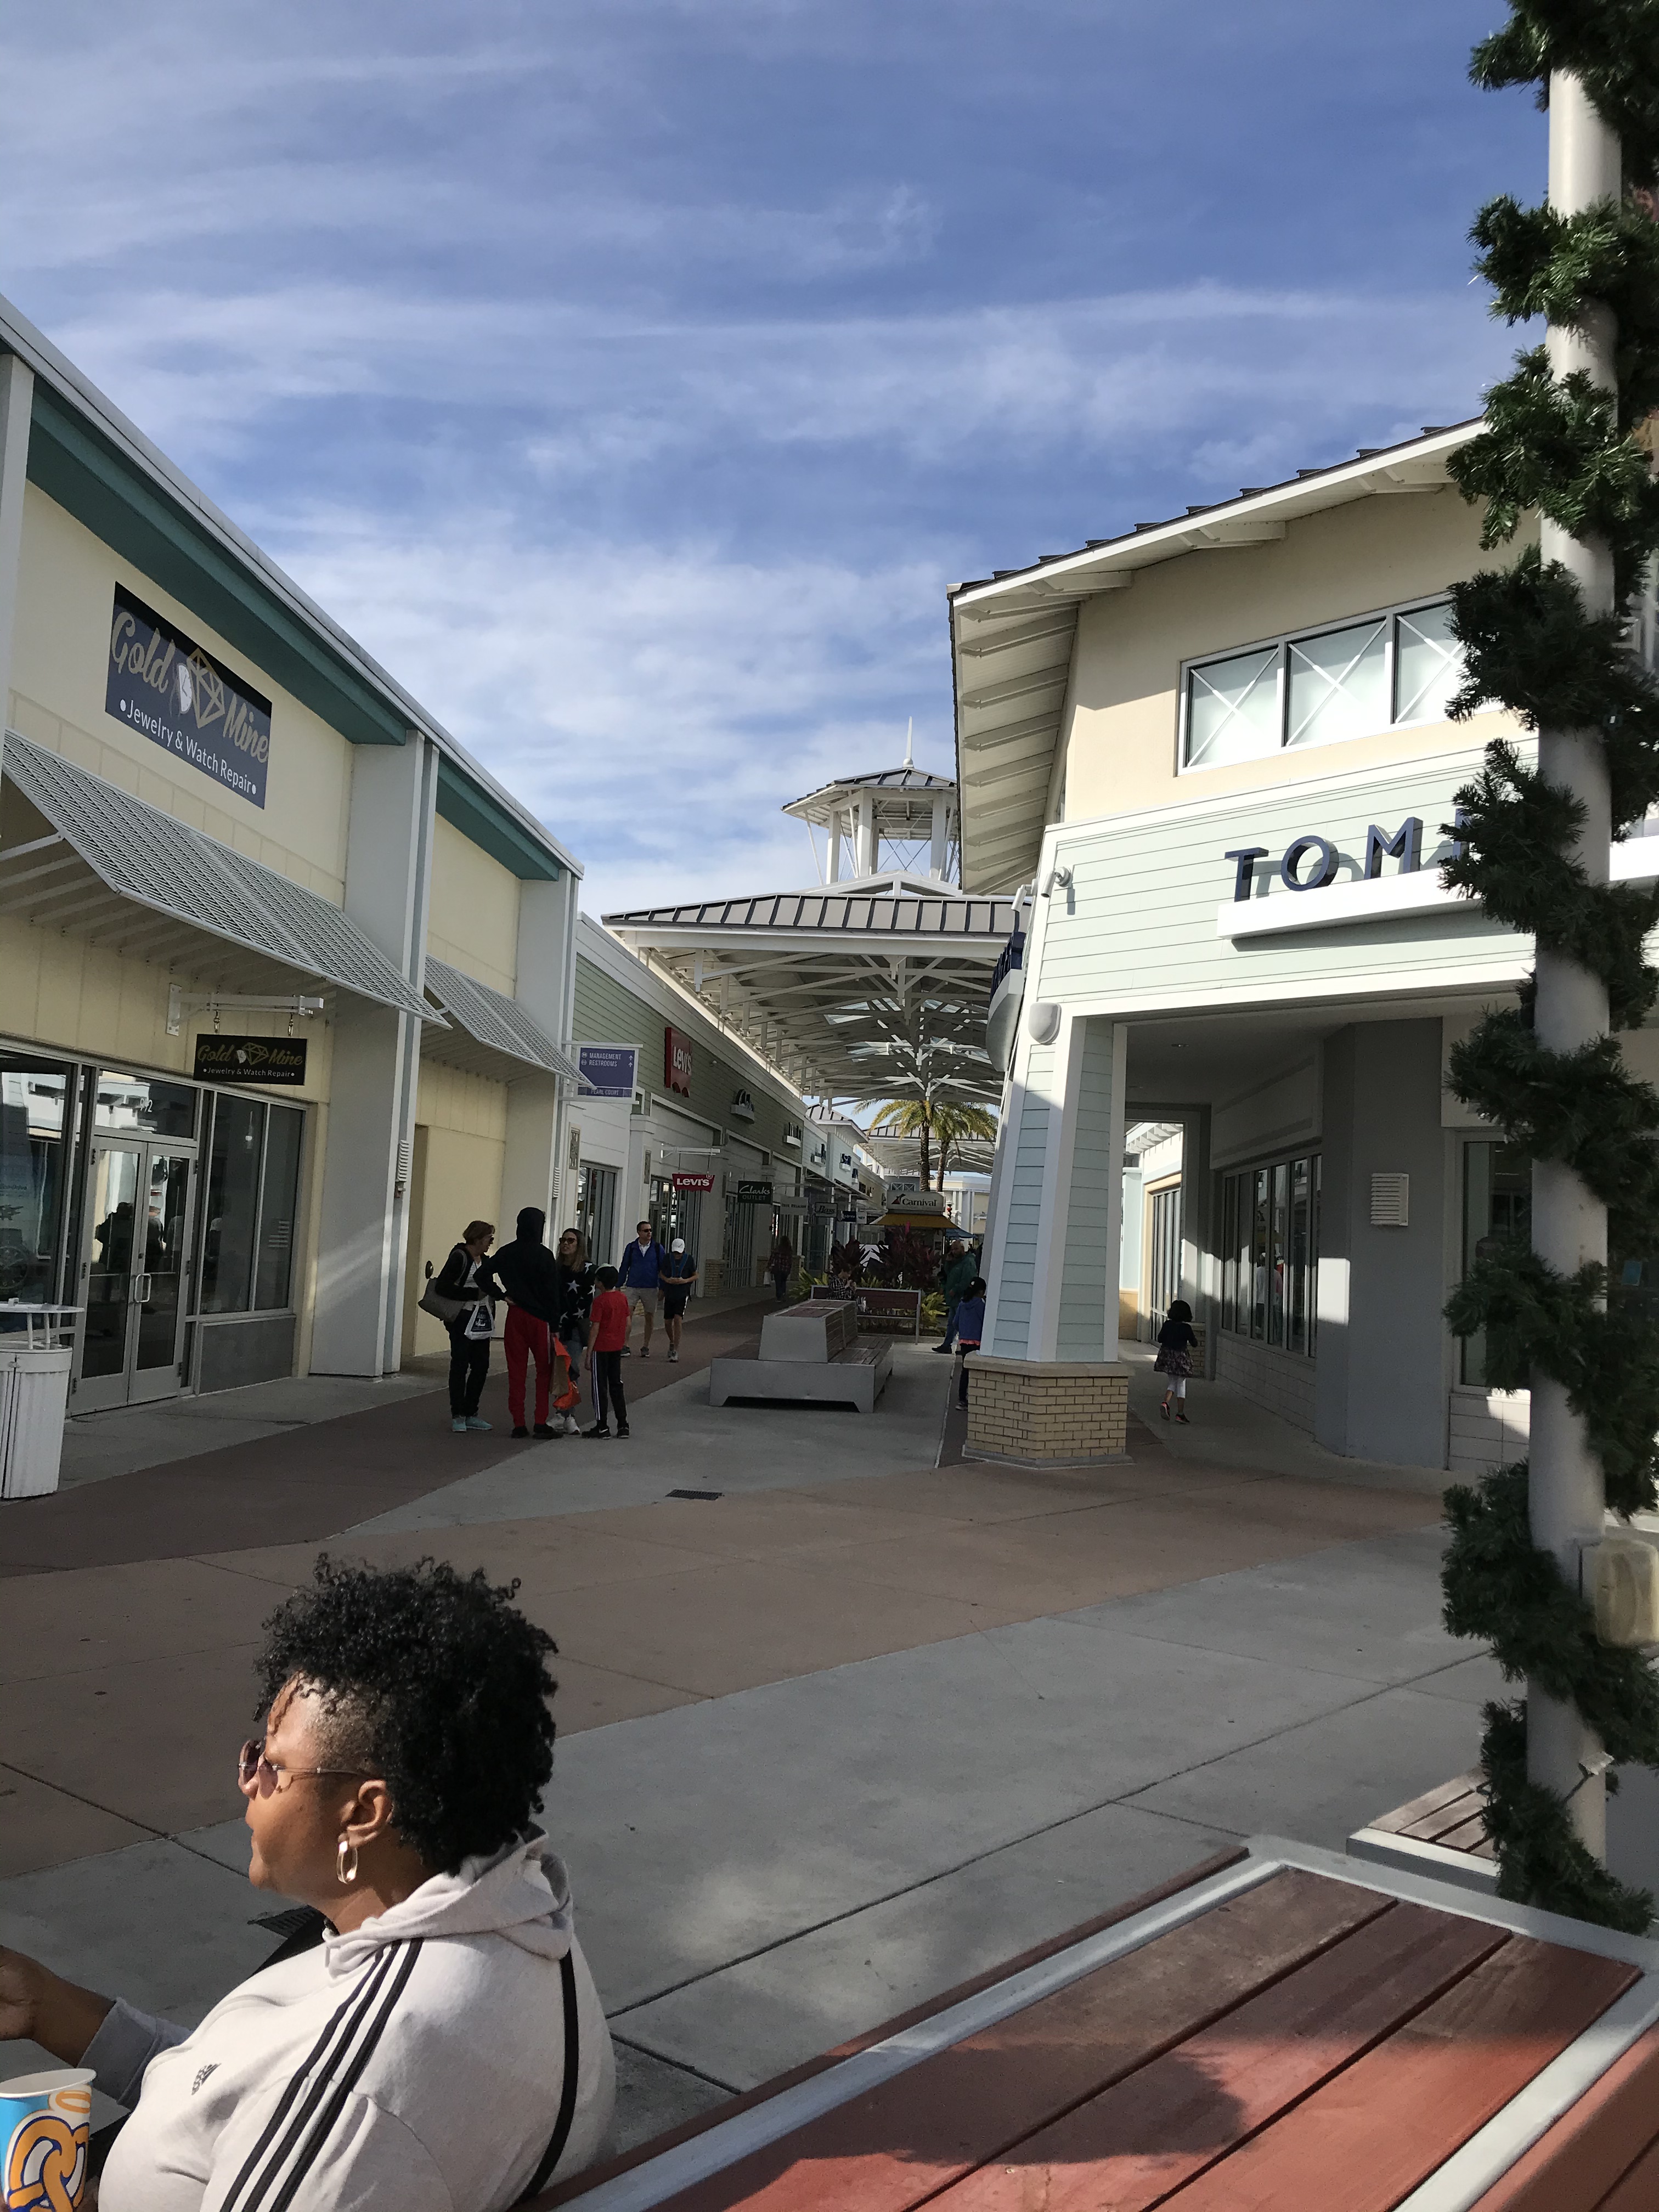 clarks outlet tampa